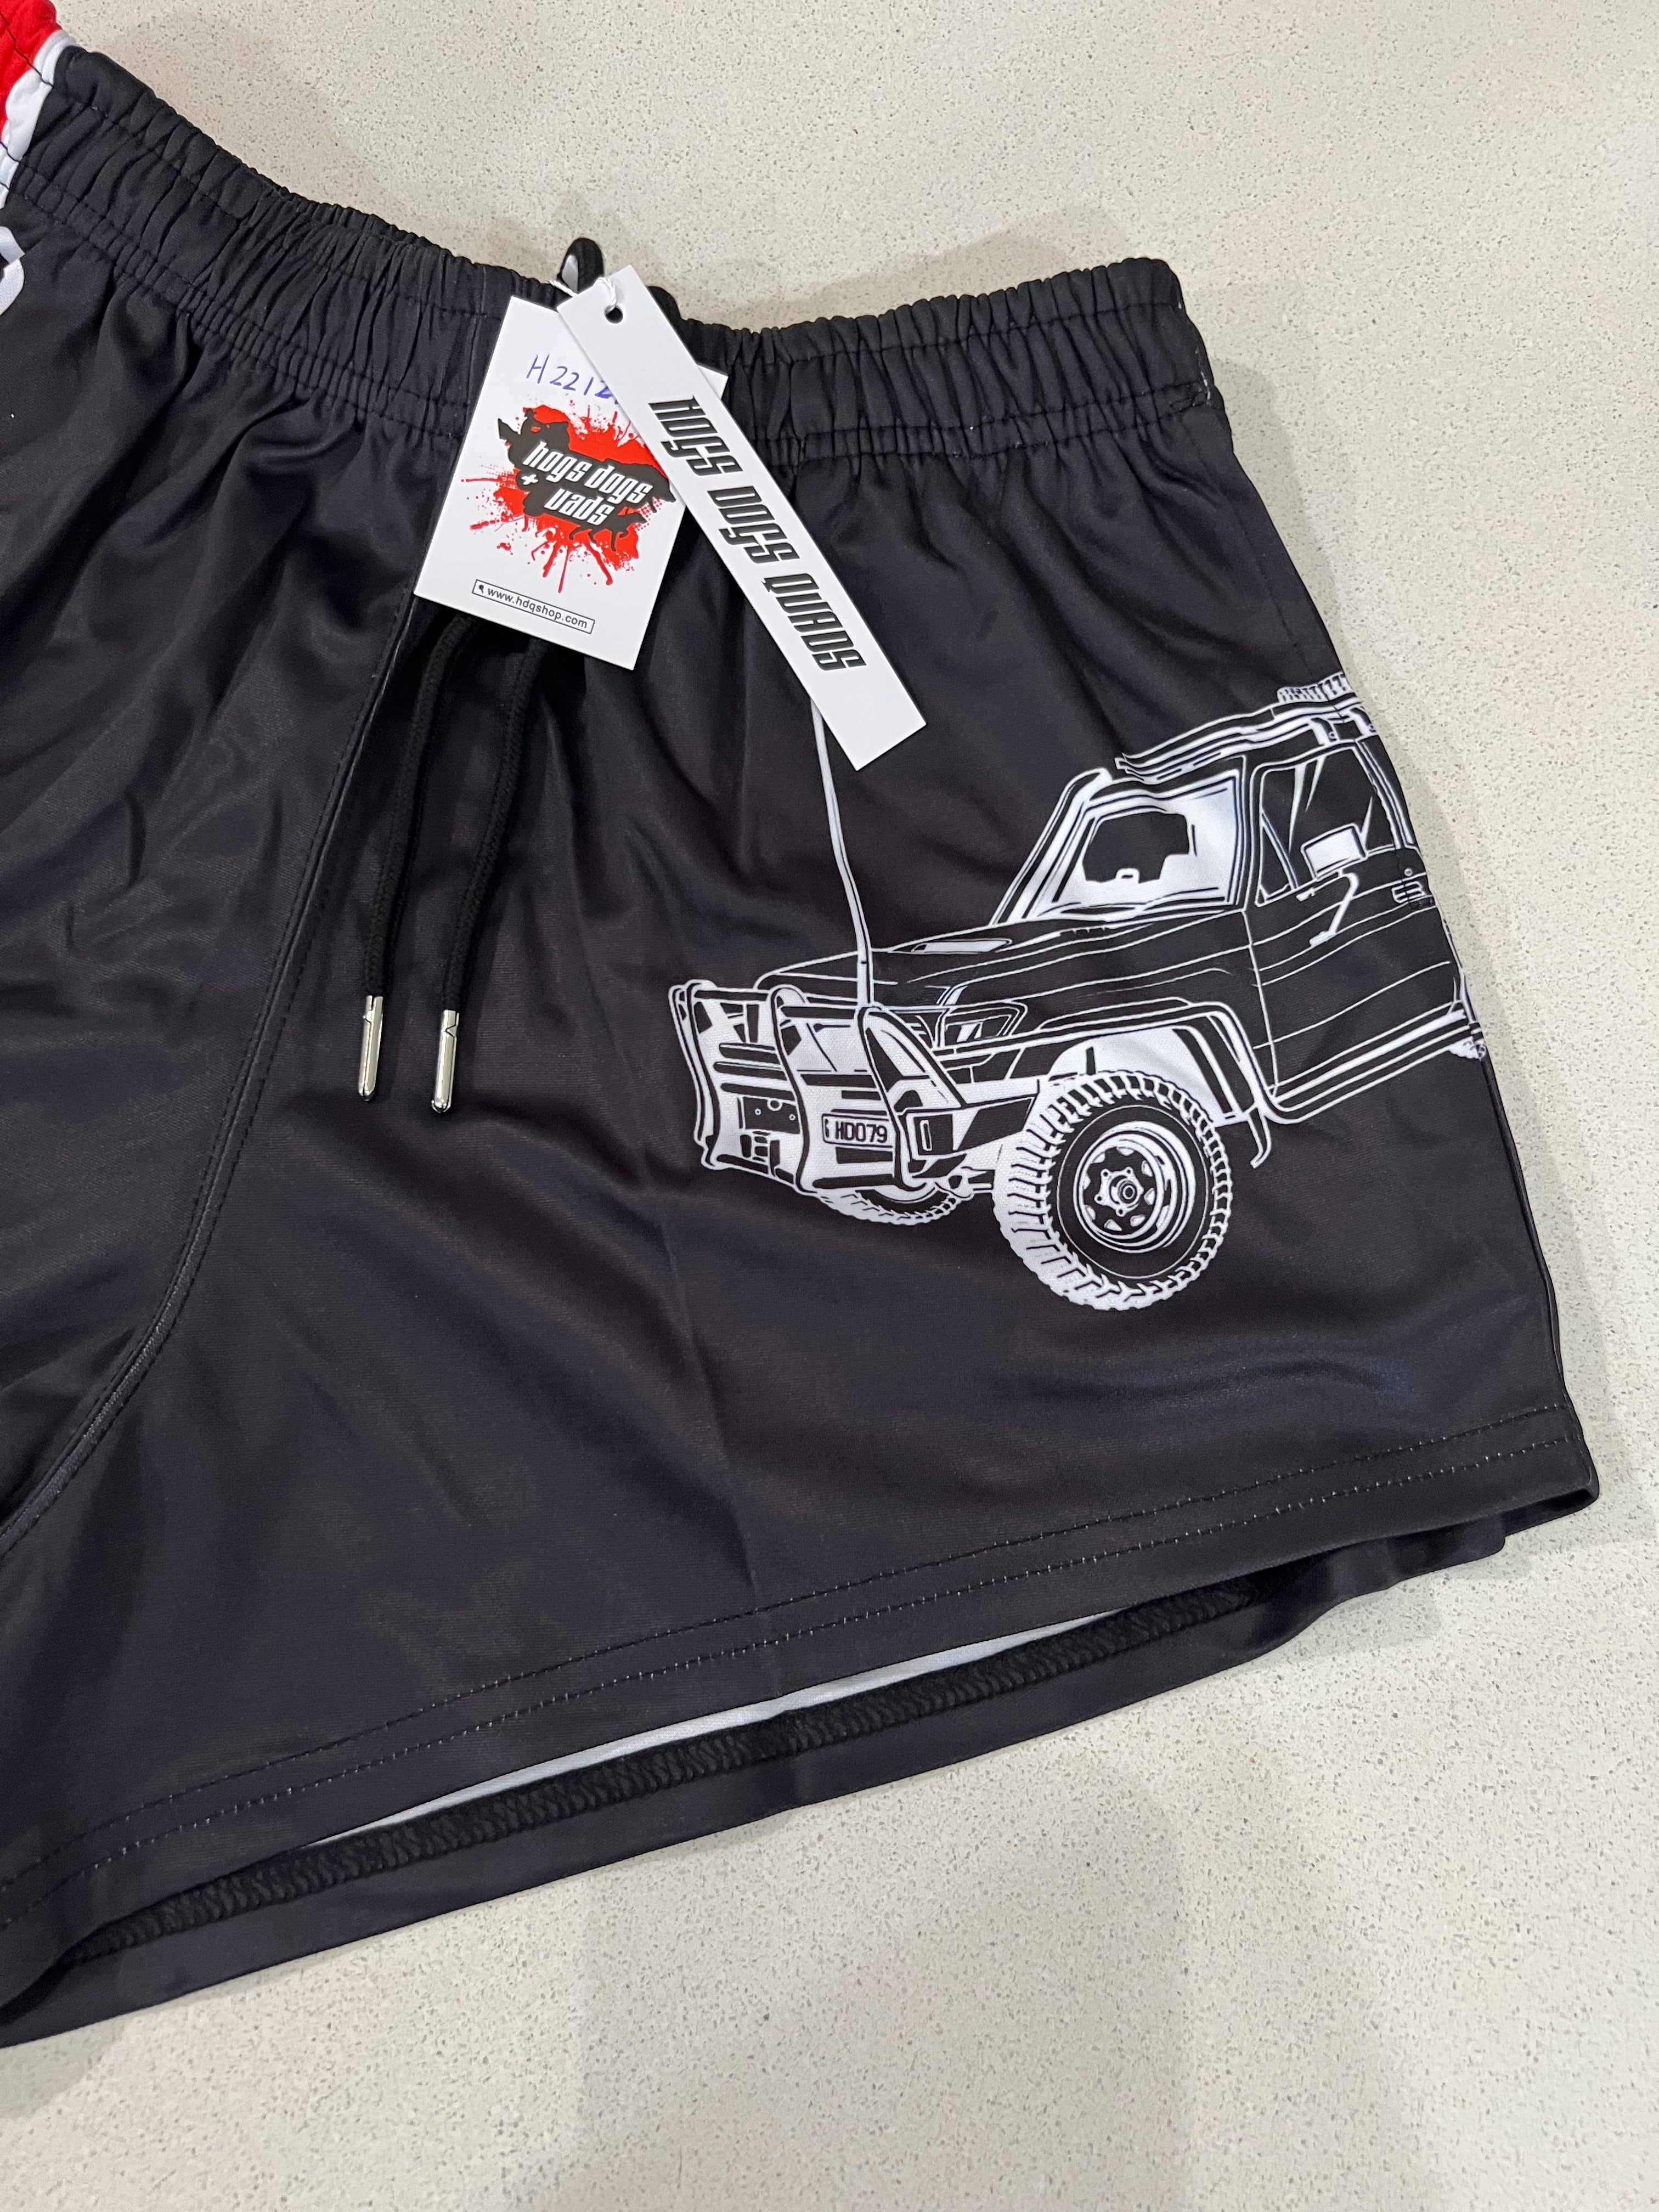 🔥NEW🔥 Footy Shorts - CRUISER COUNTRY - Hogs Dogs Quads Shop